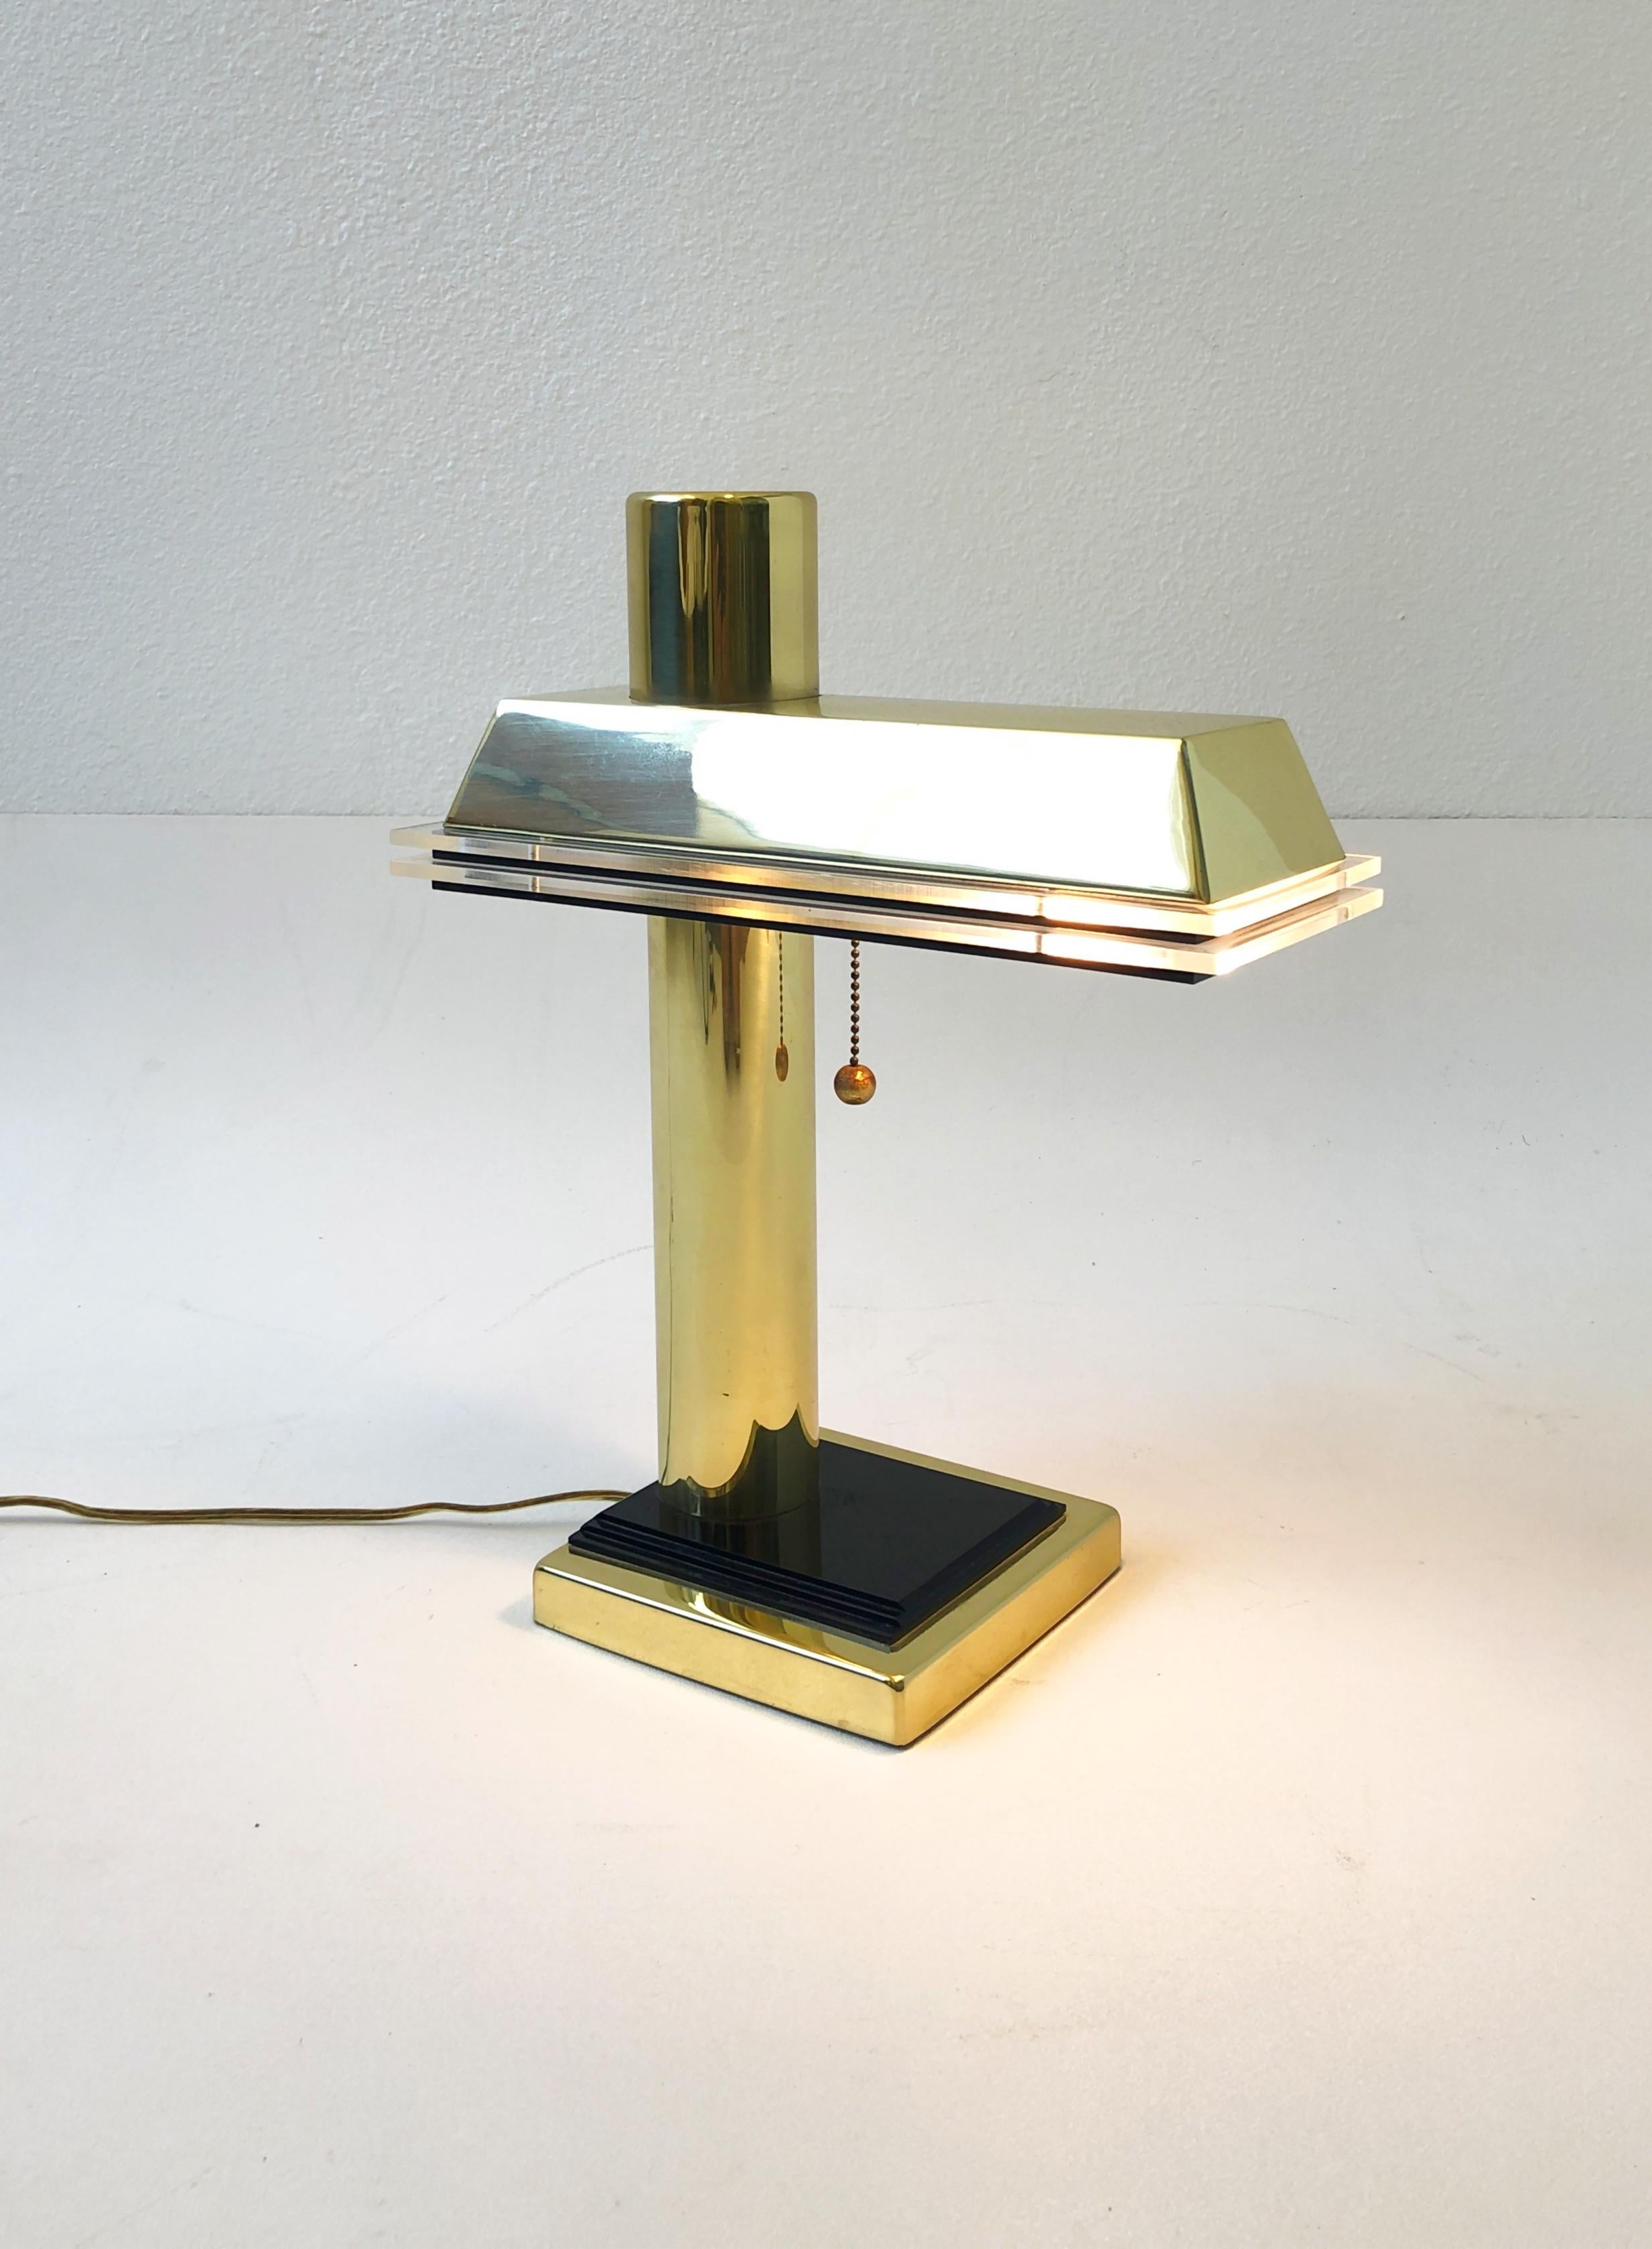 1980’s polish brass with clear and black acrylic detail desk lamp. 
It takes one regular Edison lightbulb with pull down on/off switch. 
Measurements: 13.25” wide, 6.5” deep and 16.5” high. 
Base is 6.5” wide and 6.5” deep.